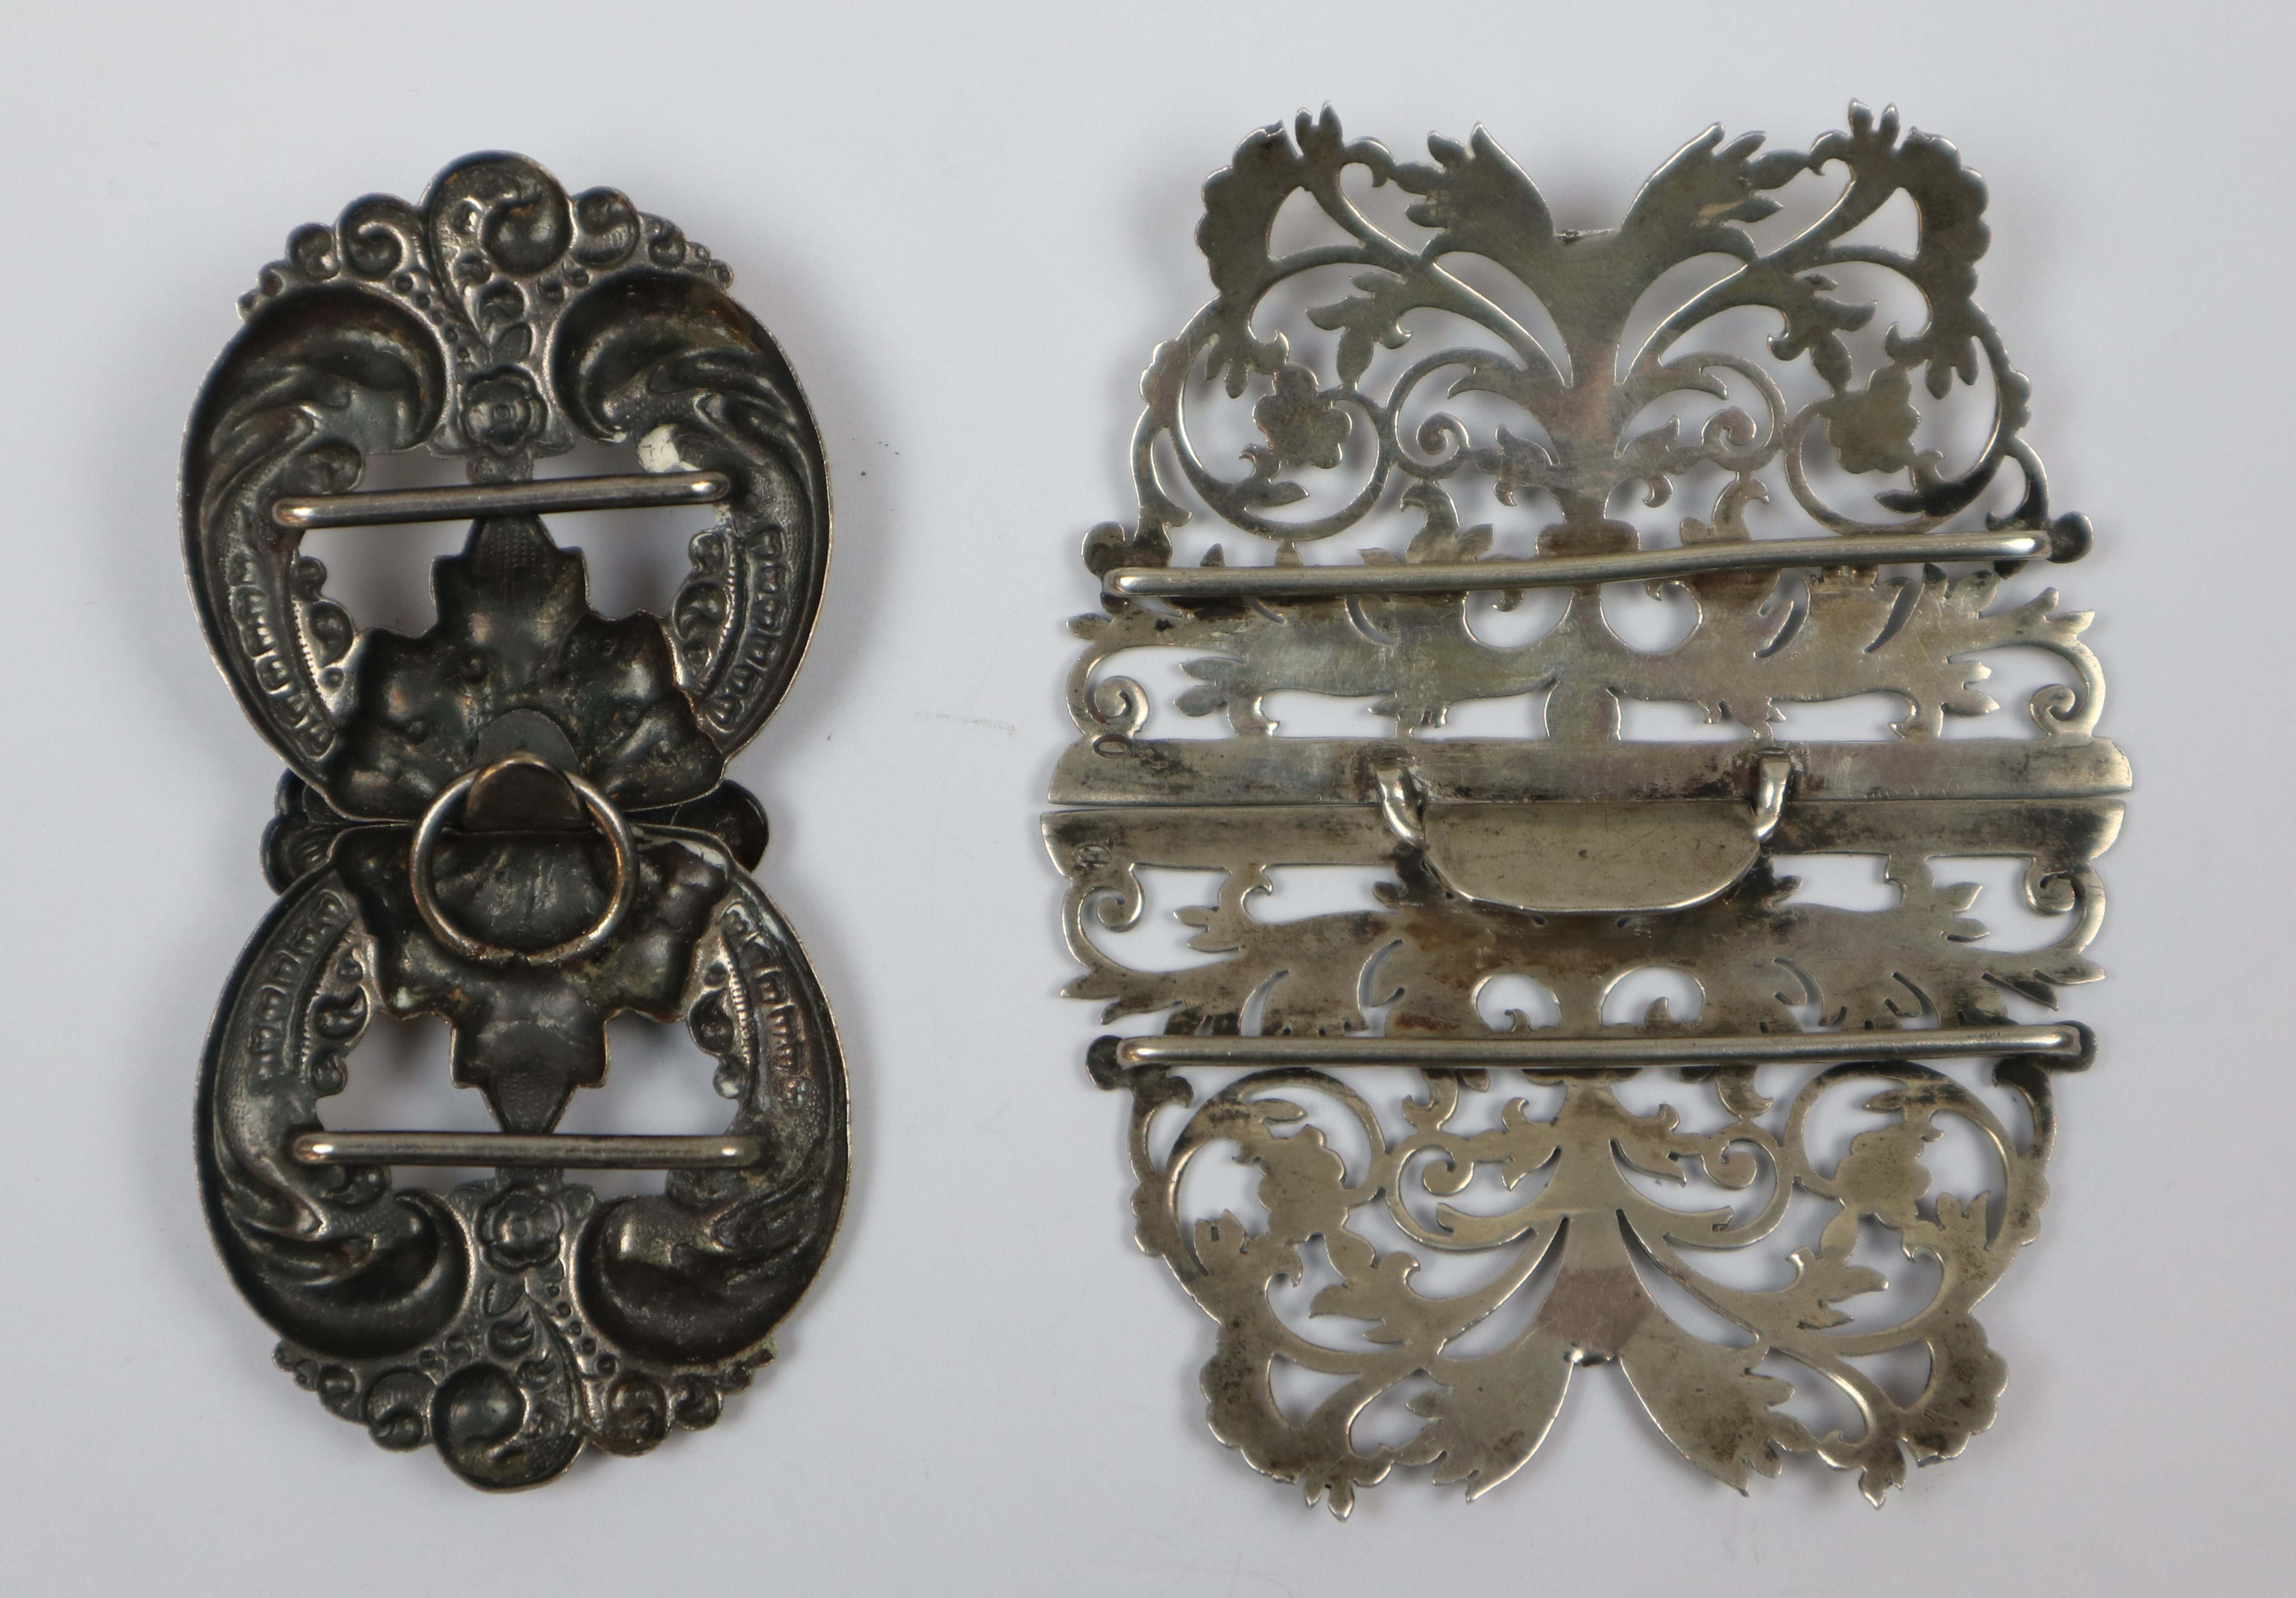 2 hallmarked silver belt buckles - Approx weight 53g - Image 2 of 2